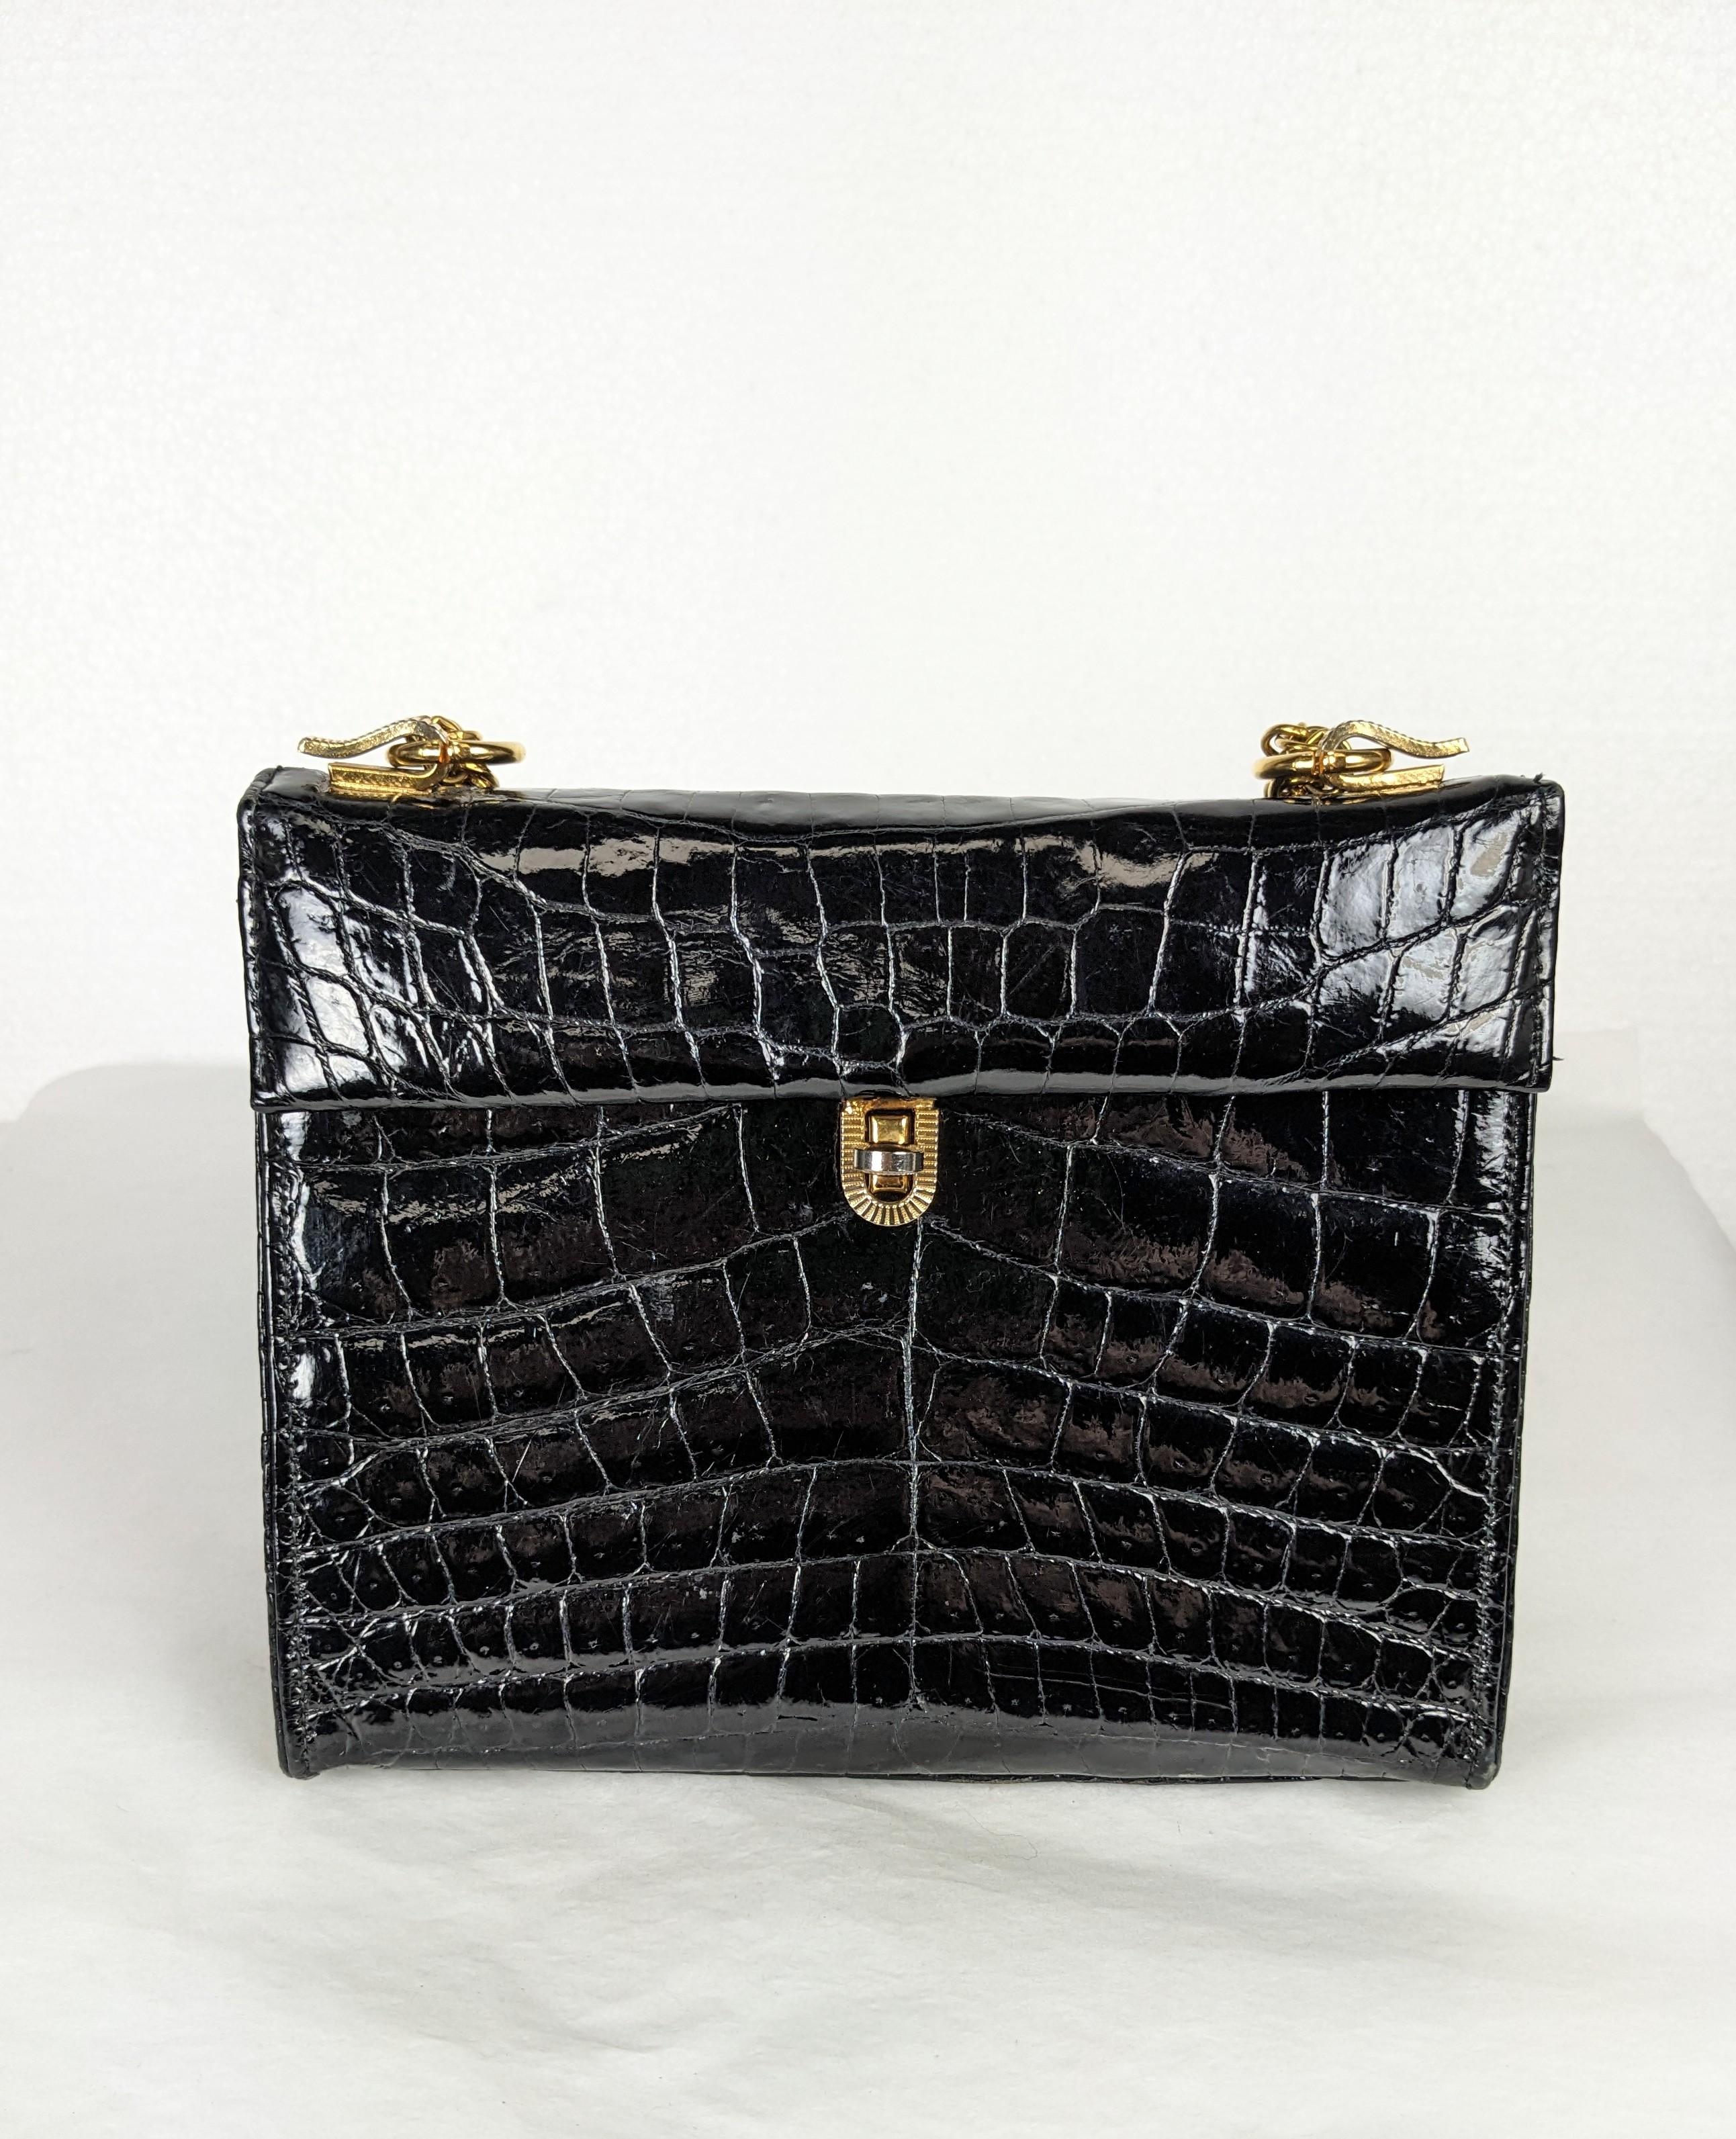 Charming Mini Alligator Structured Shoulder Bag with long gilt chain and center cut front skin. Great size which allows chain to be doubled. Faille lined,
6.75